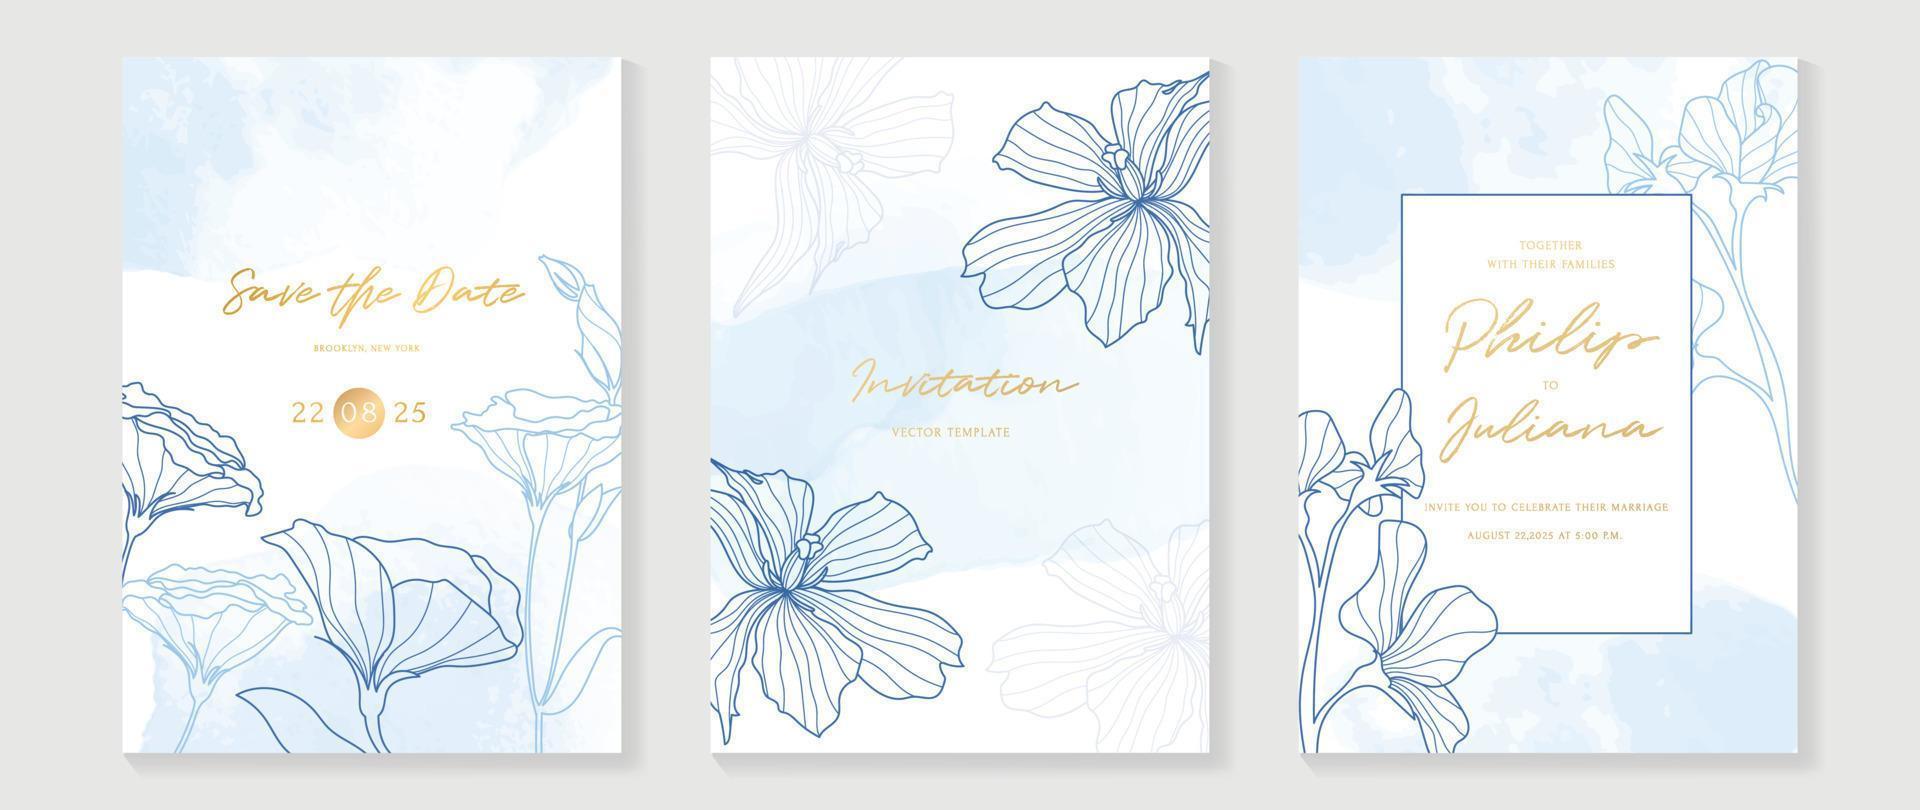 Luxury wedding invitation card background vector. Blue color theme botanical flowers line art with watercolor texture background. Design illustration for wedding and vip cover template, banner. vector